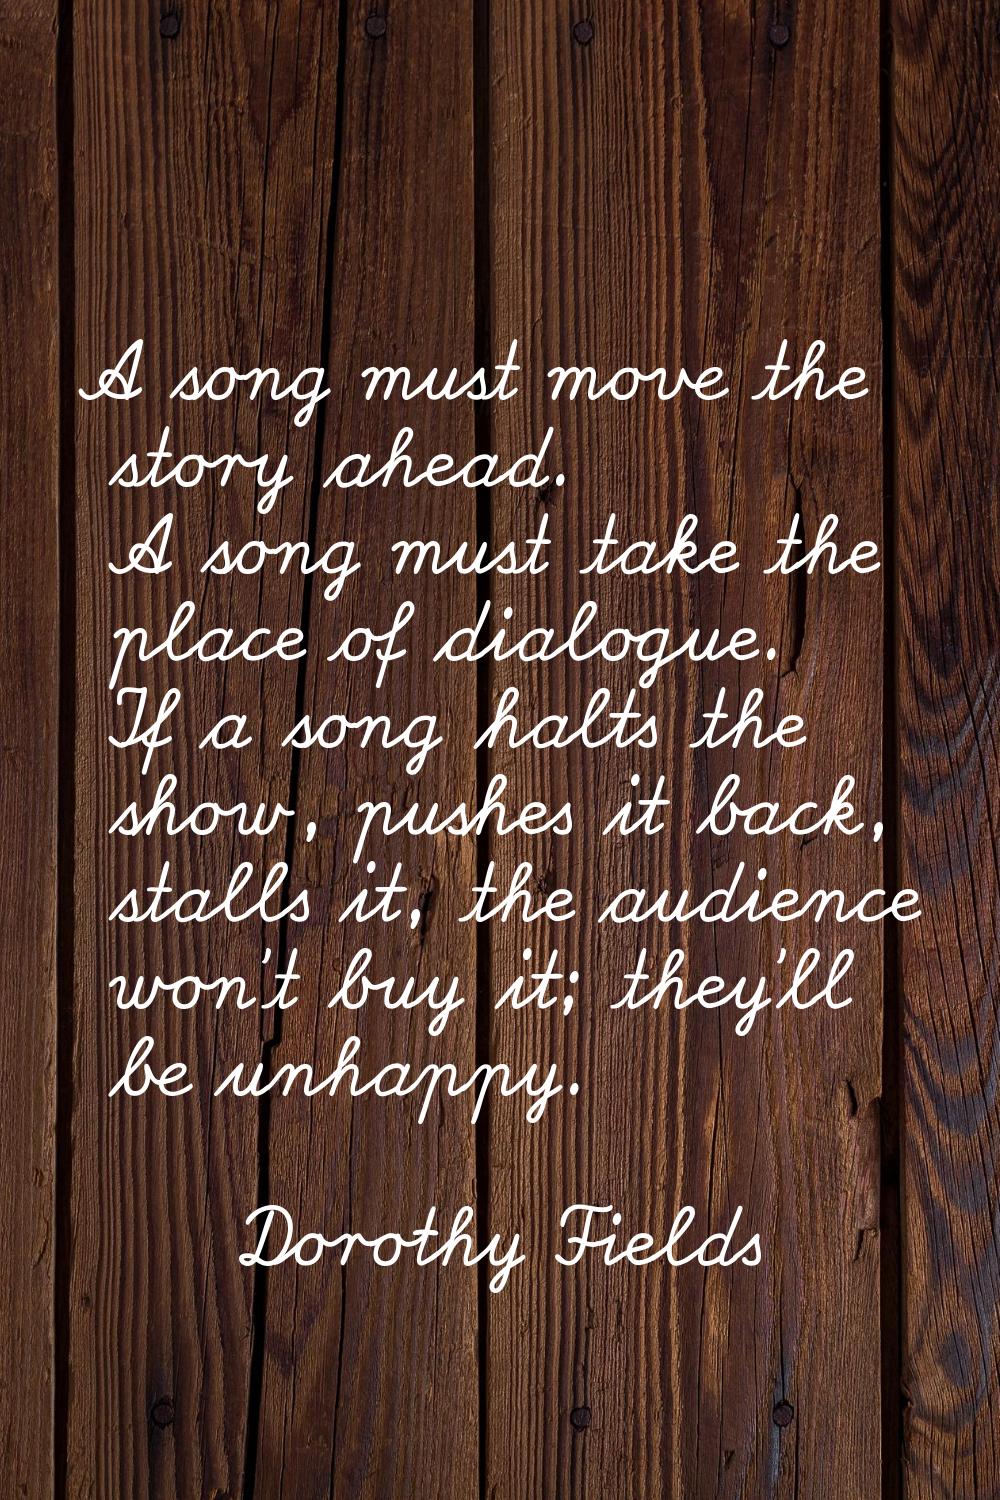 A song must move the story ahead. A song must take the place of dialogue. If a song halts the show,